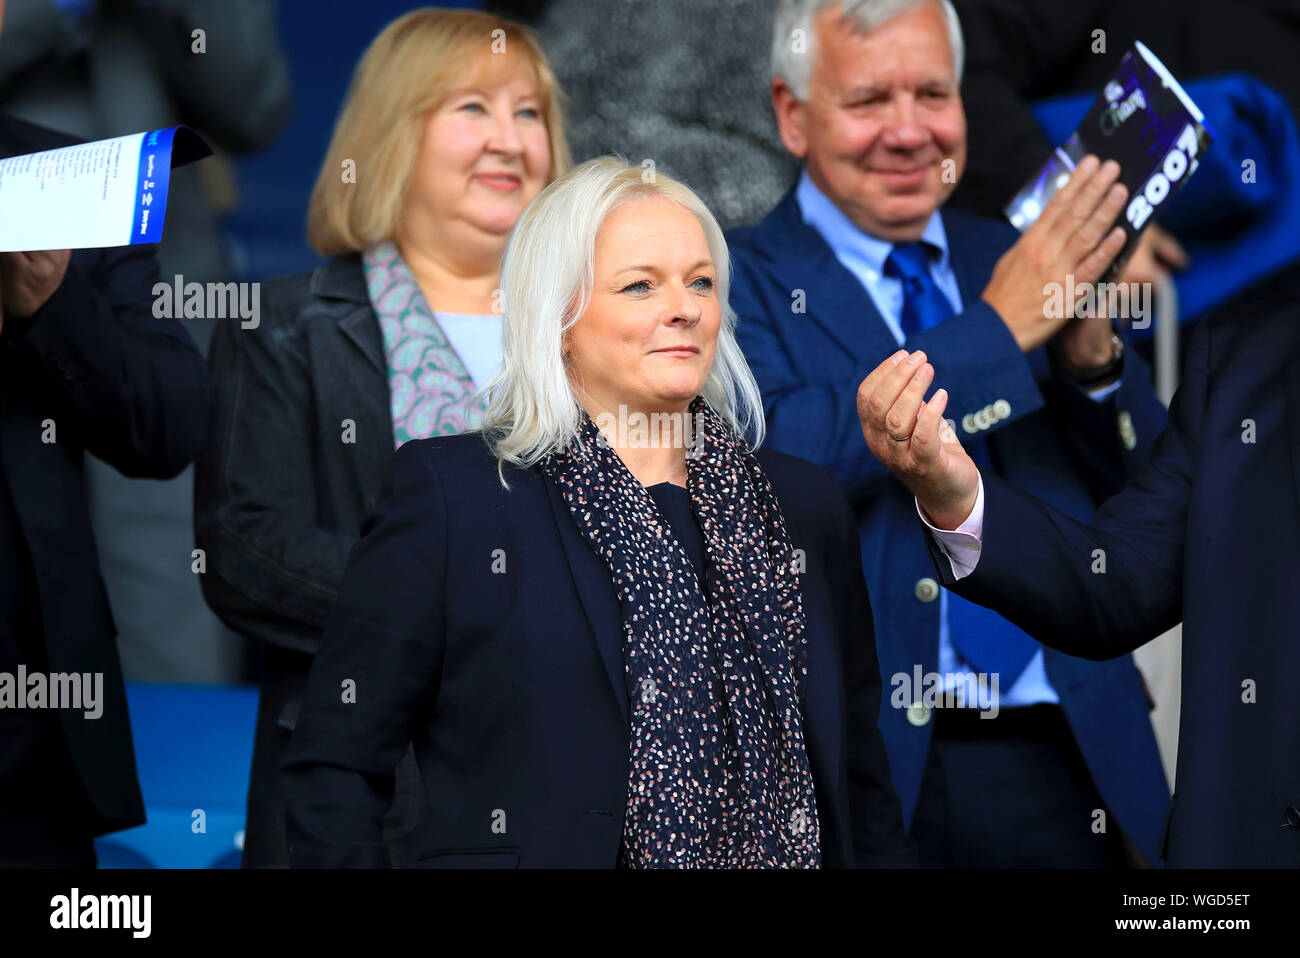 Director at Everton Football Club Denise Barrett-Baxendale in the stands during the Premier League match at Goodison Park, Liverpool. Stock Photo